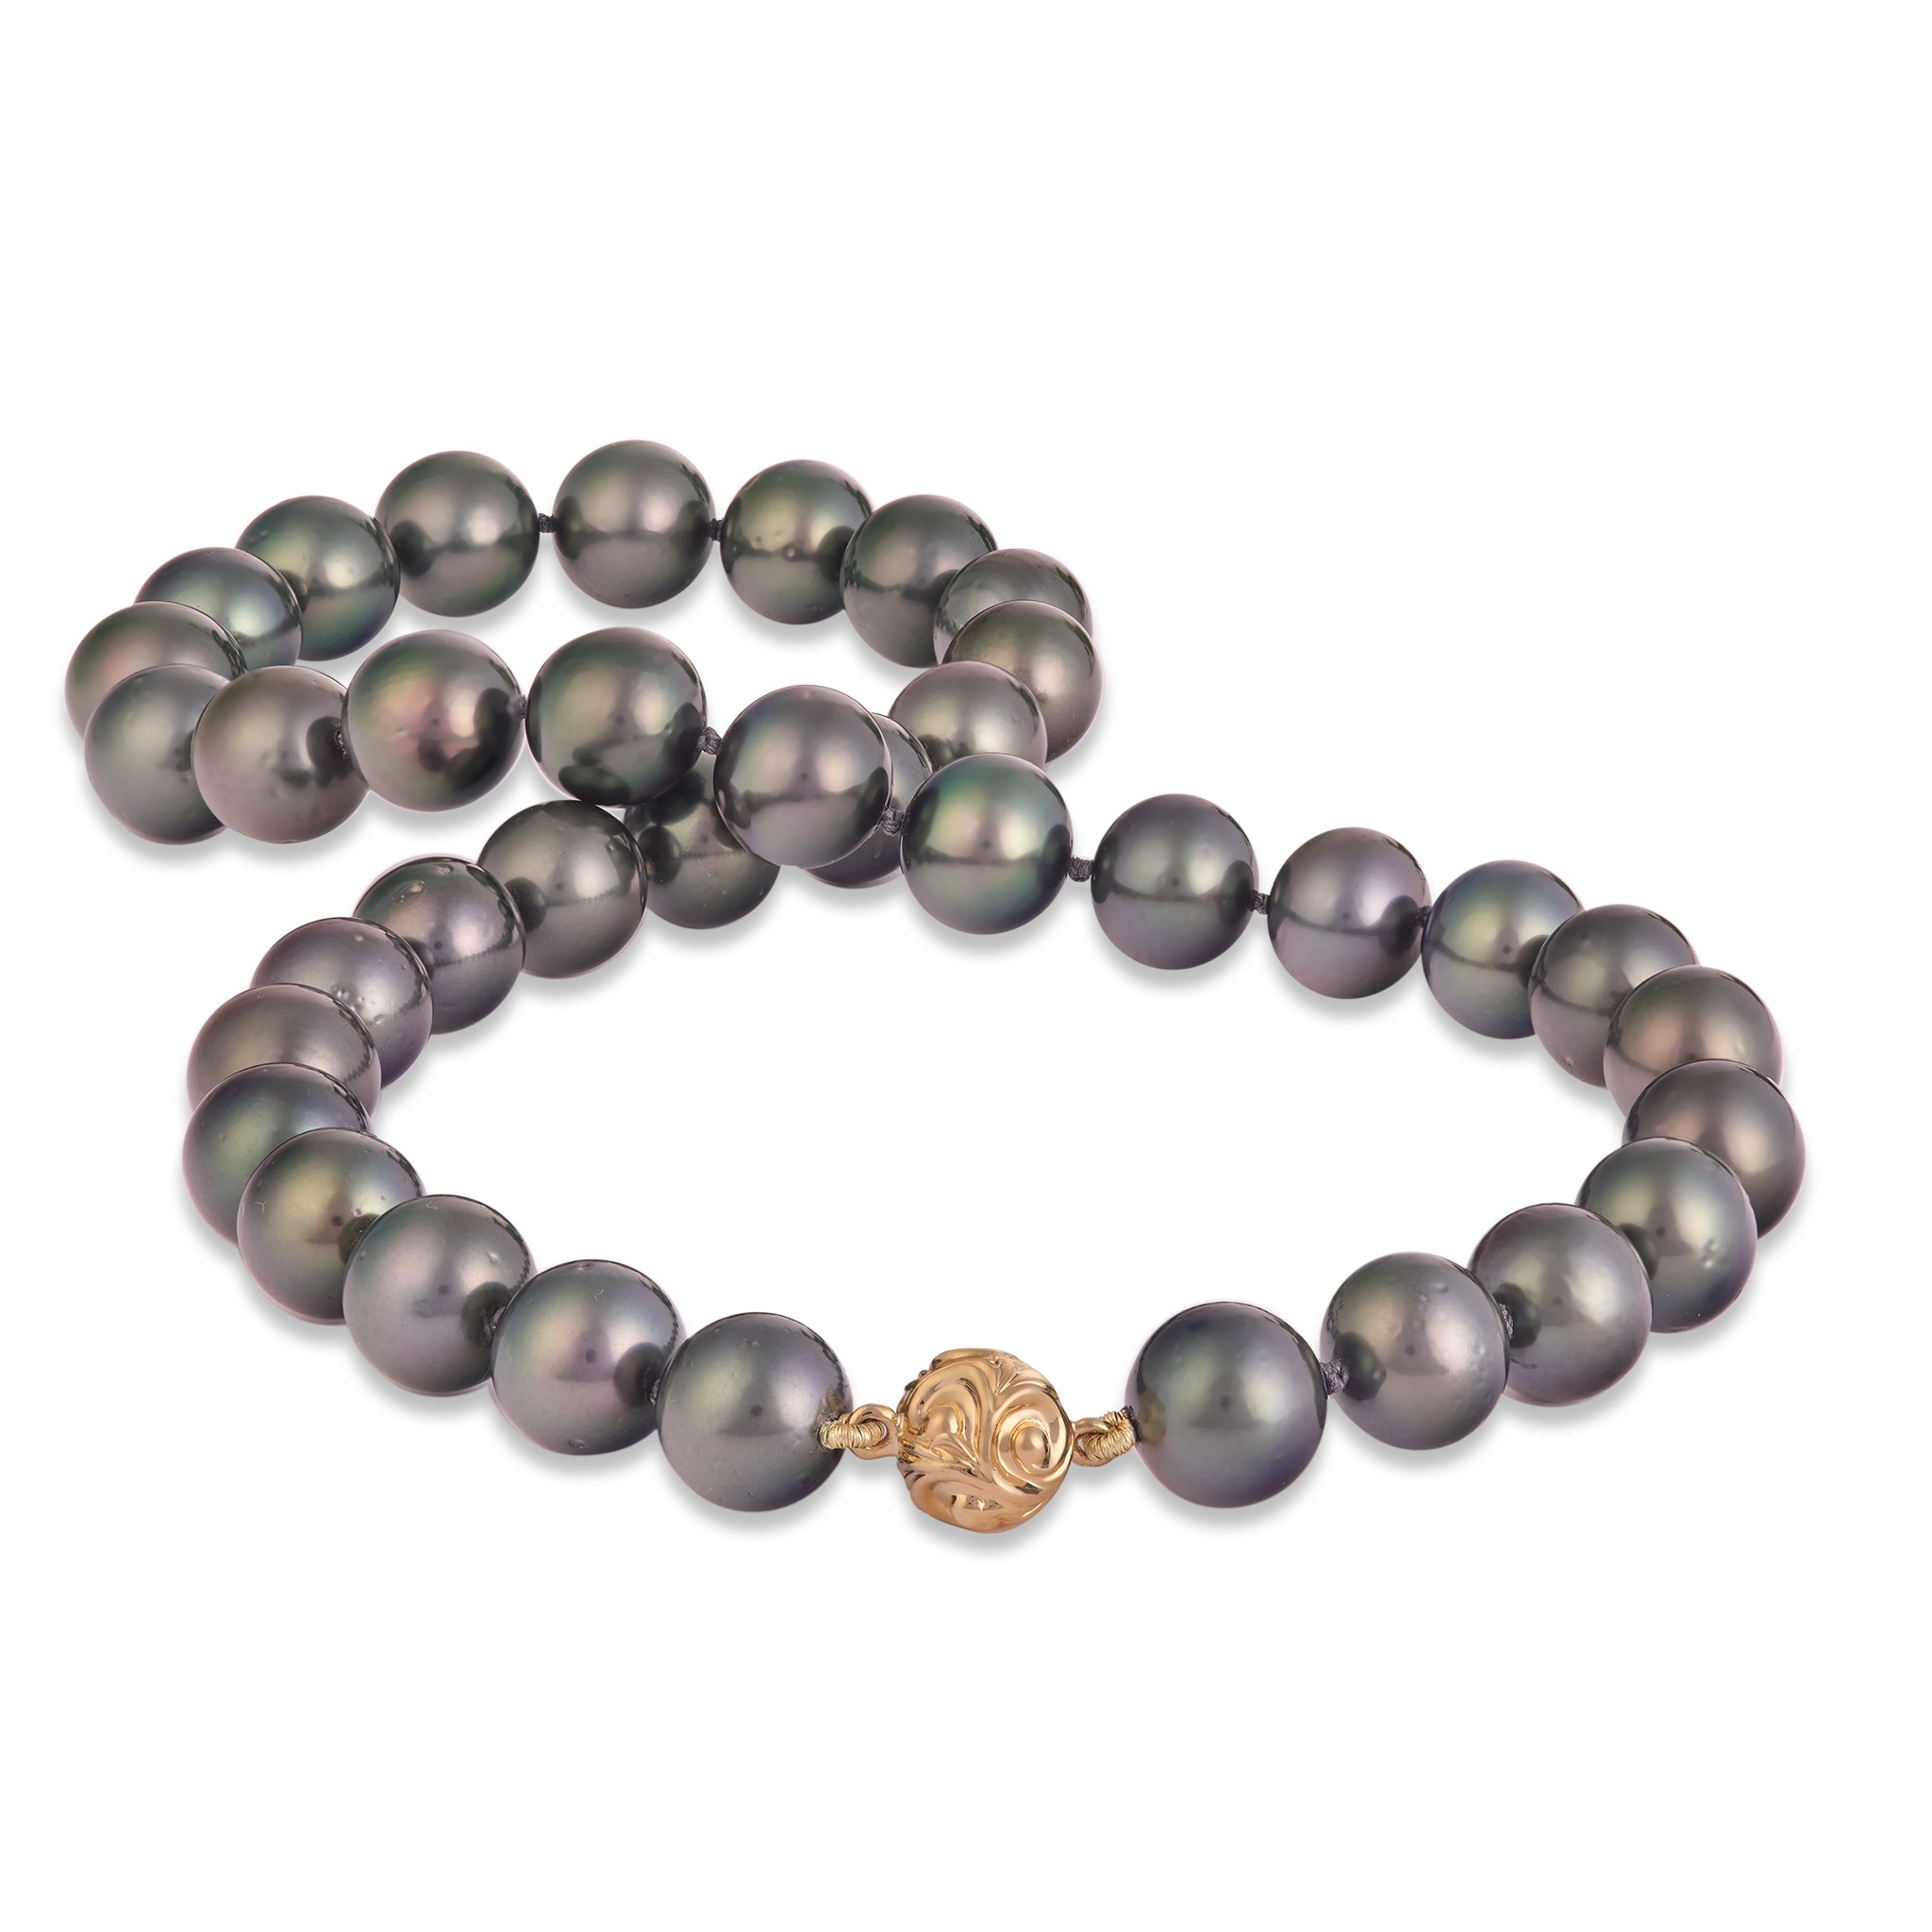 7.78-8 Tahitian Black Pearl Bracelet with Magnetic Gold Clasp